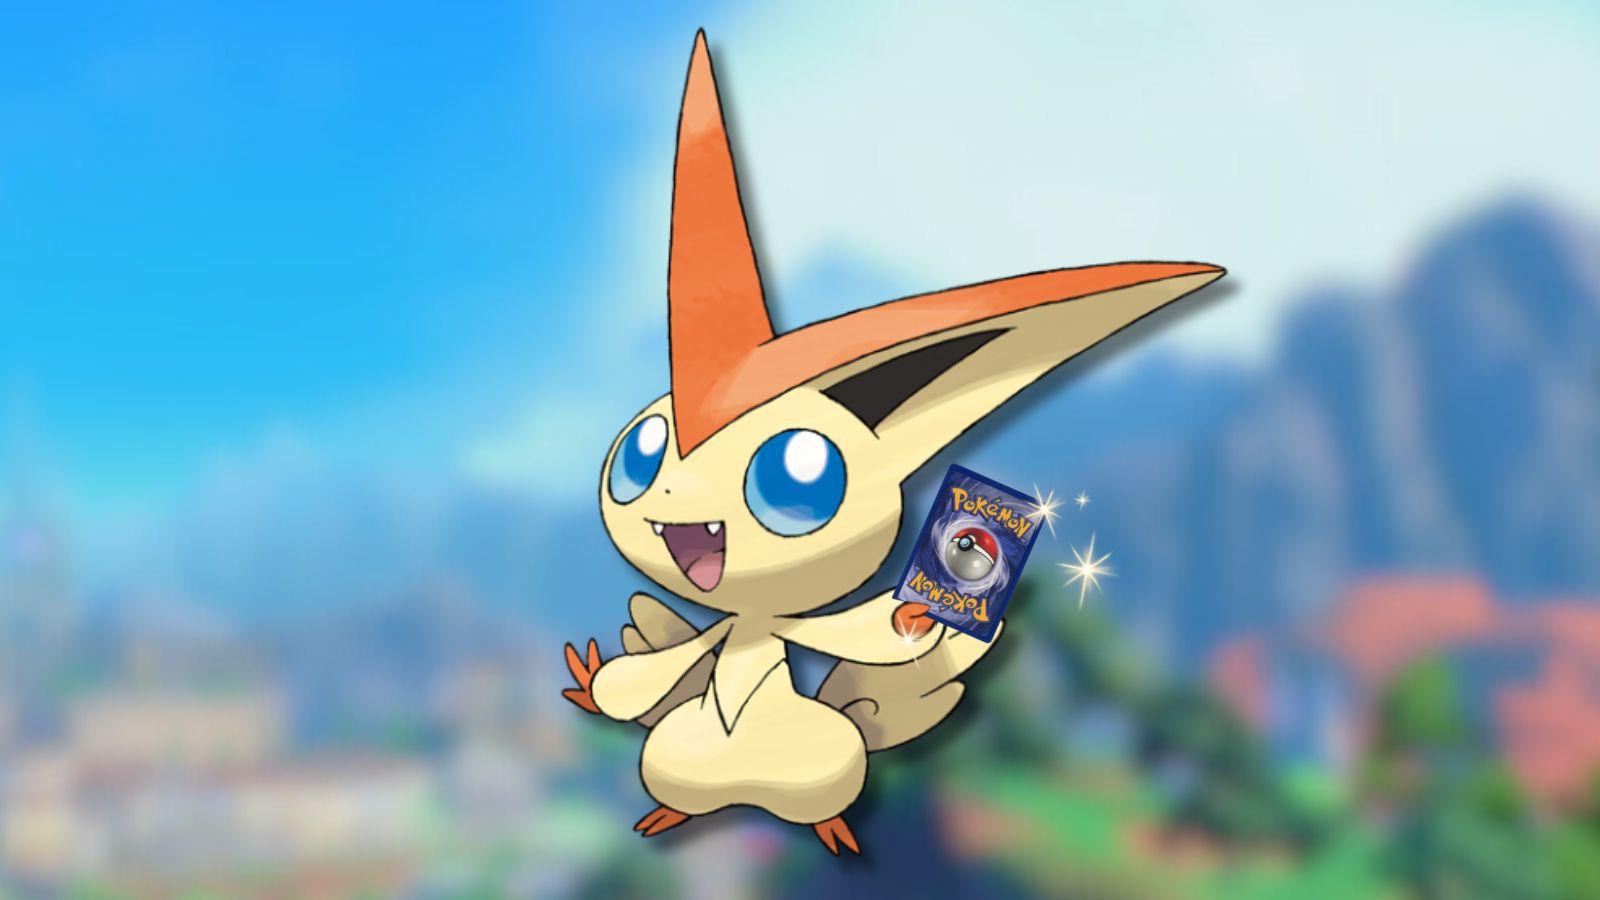 Victini Pokemon holding Pokemon card with sparkles and game background.